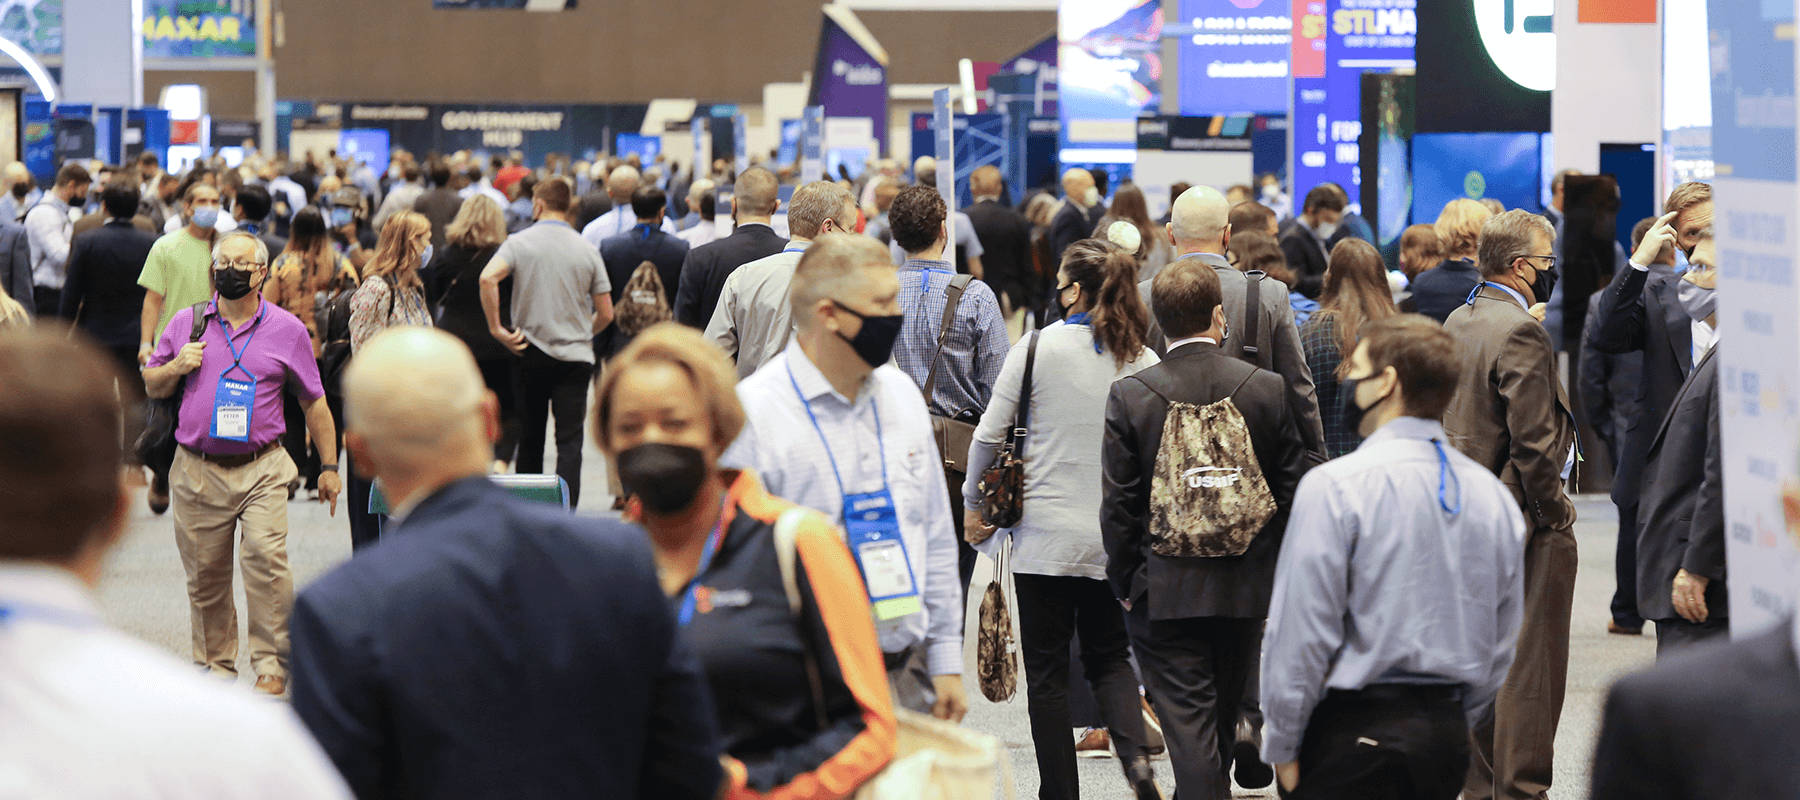 Exhibit_Hall_Crowd_GEOINT_2021_v3tpg